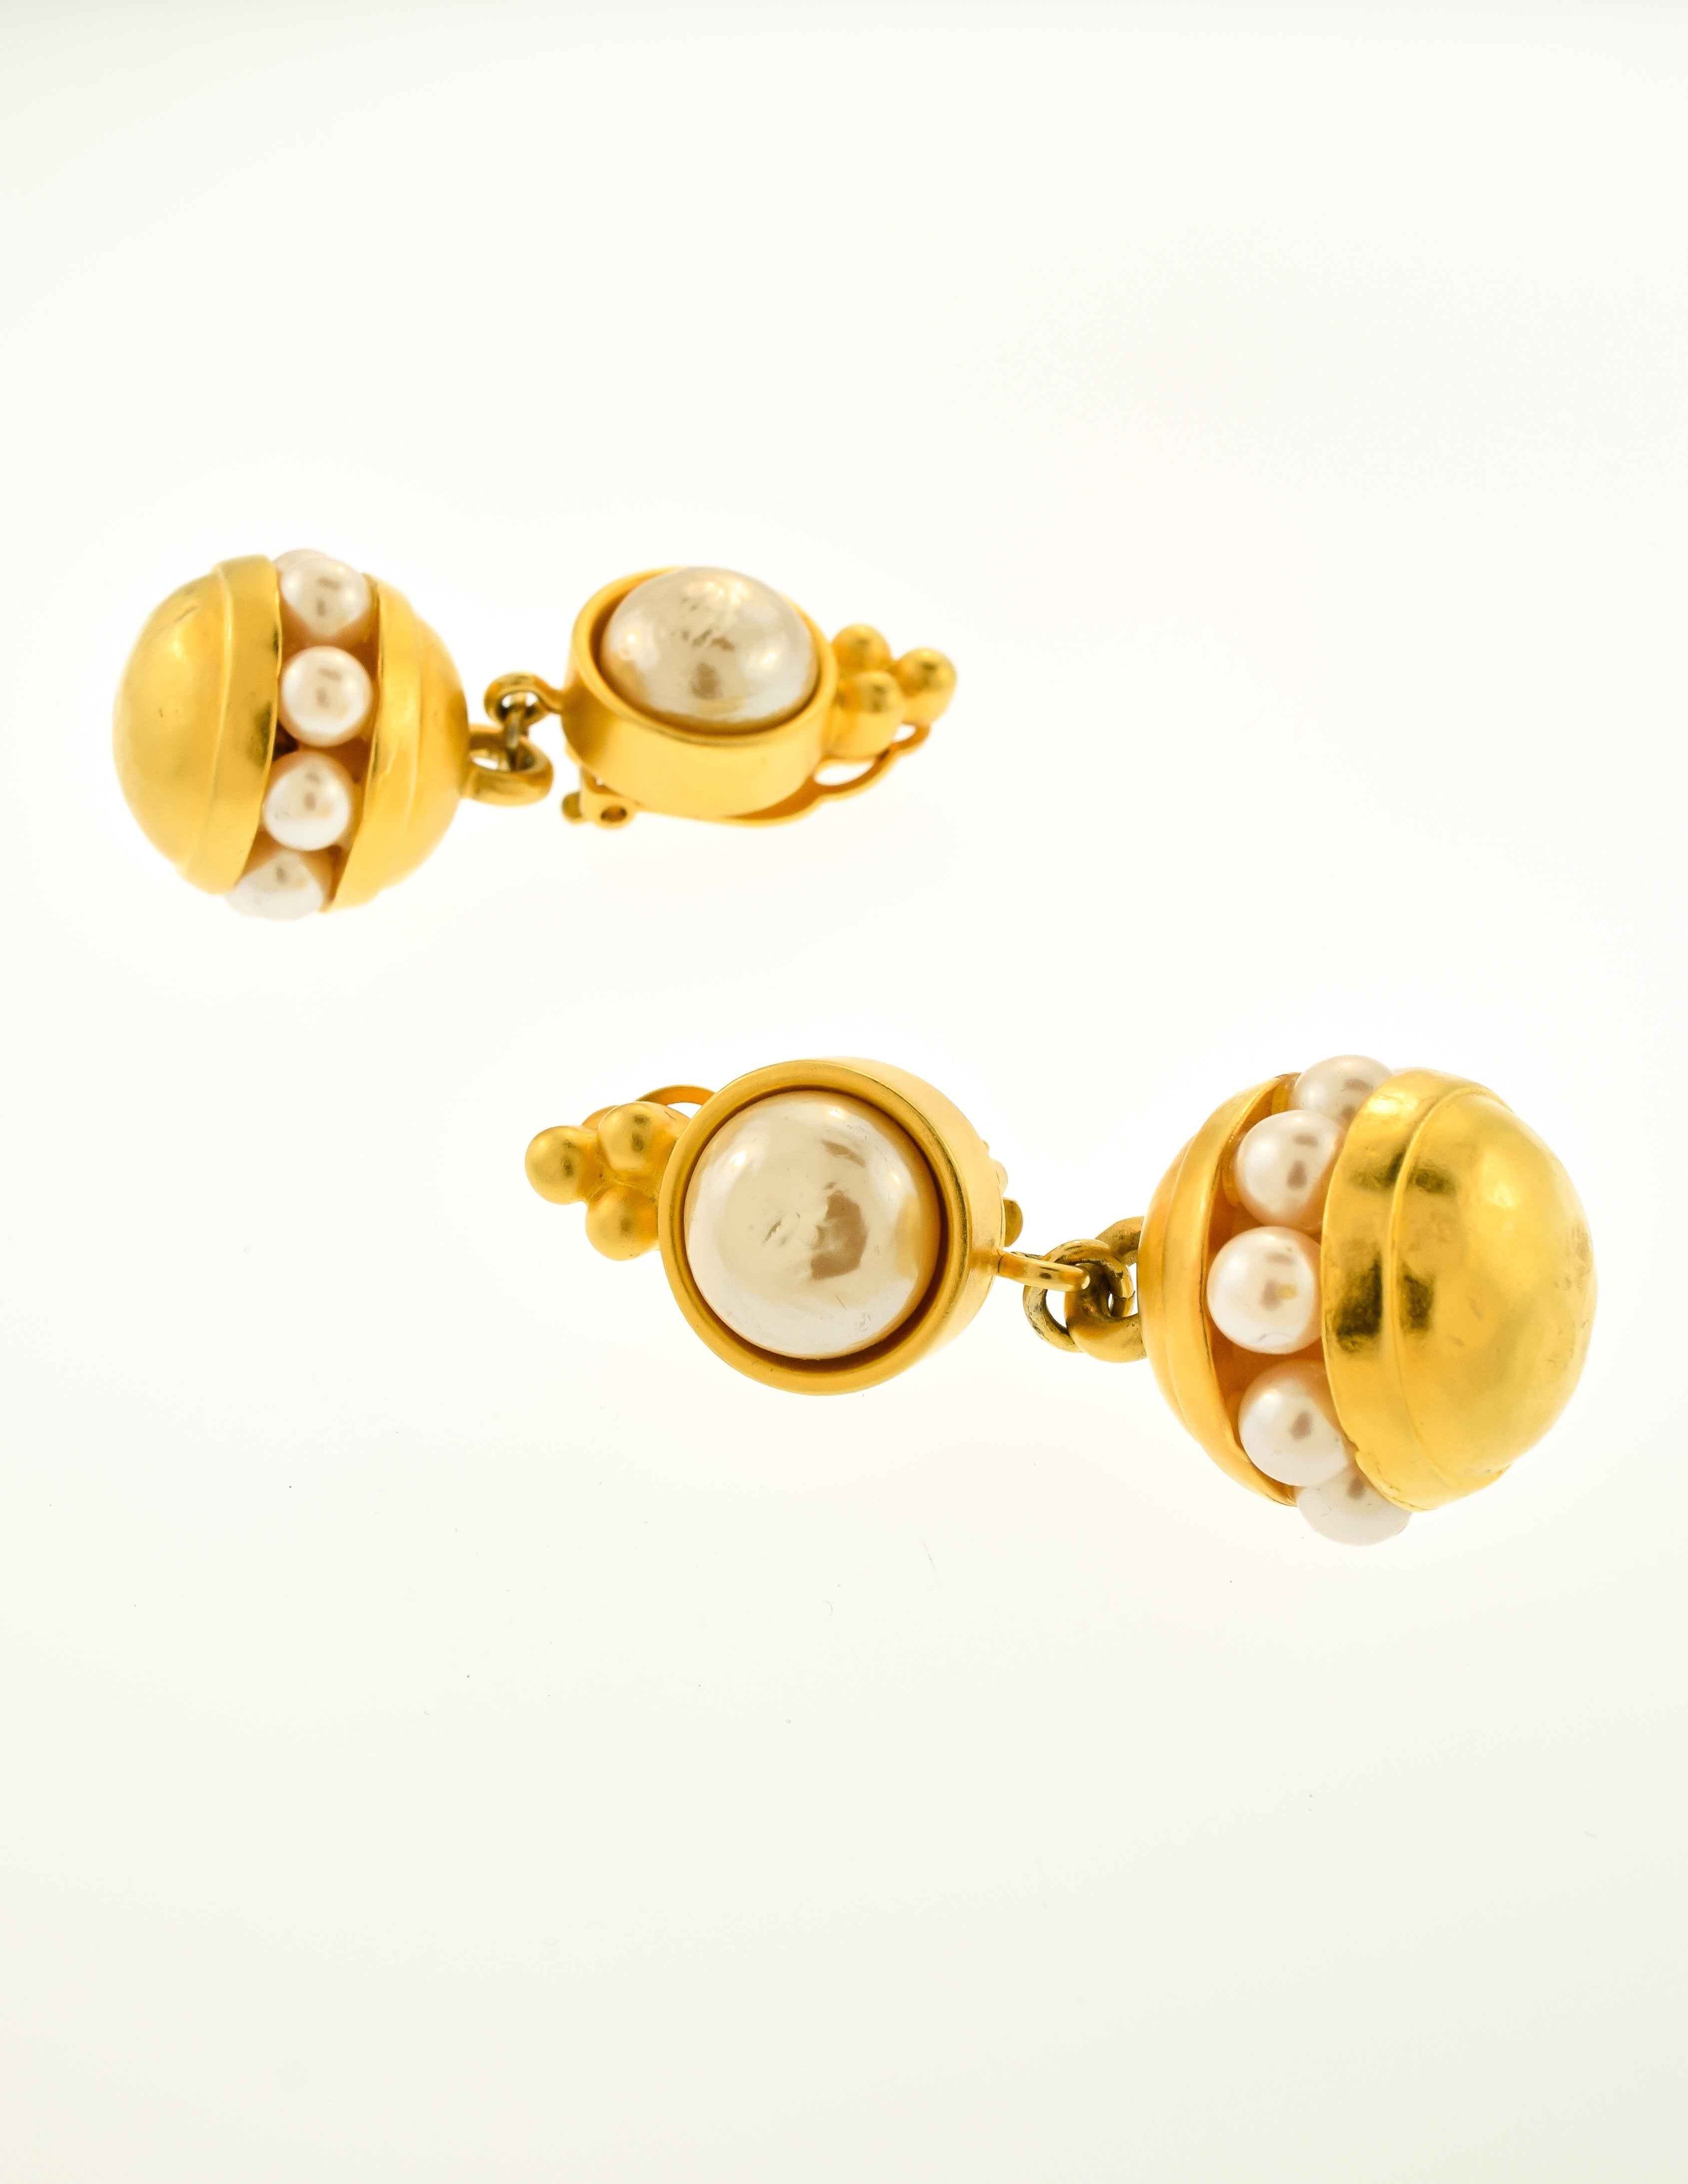 Karl Lagerfeld Vintage Gold and Pearl Dangle Earrings - from Amarcord ...